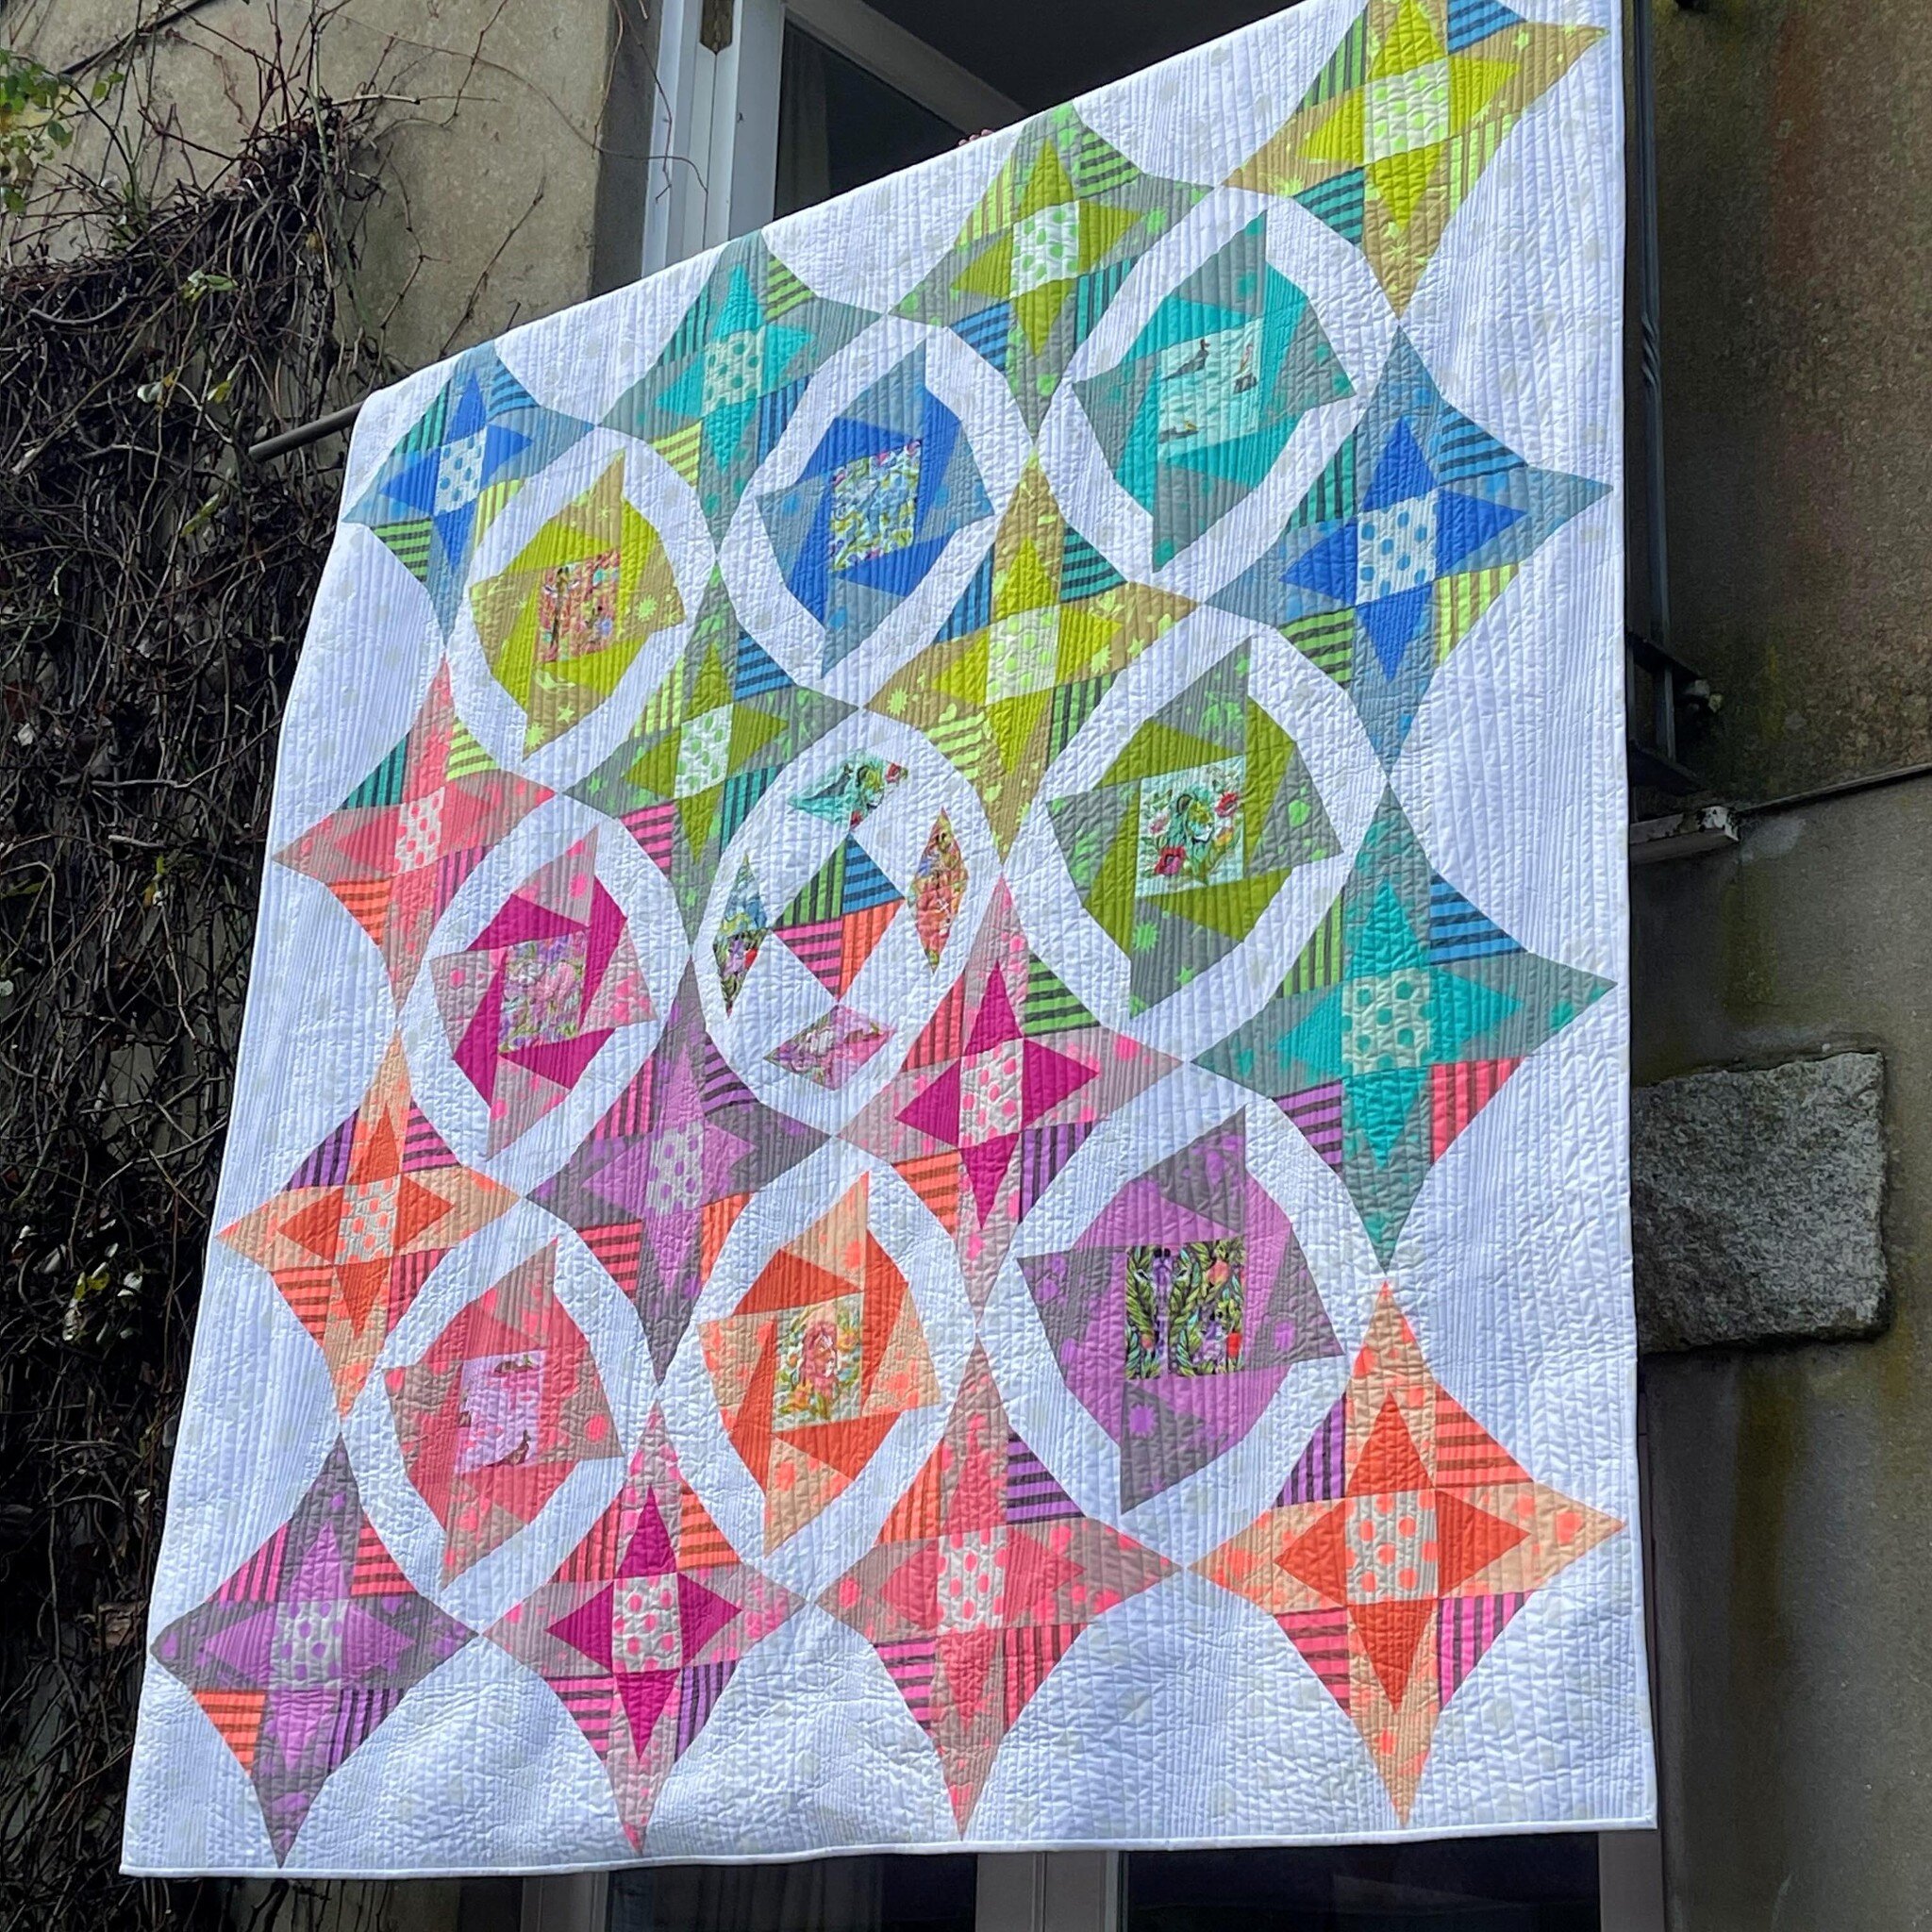 ✨ Our Bedazzled quilt using fabulous @tulapink fabrics from Everglow and Neon True Colors ✨

We ran this as a block of the month and can now offer it to you as a quilt kit (UK only I&rsquo;m afraid).

This quilt kit is available as two sizes - 90in o